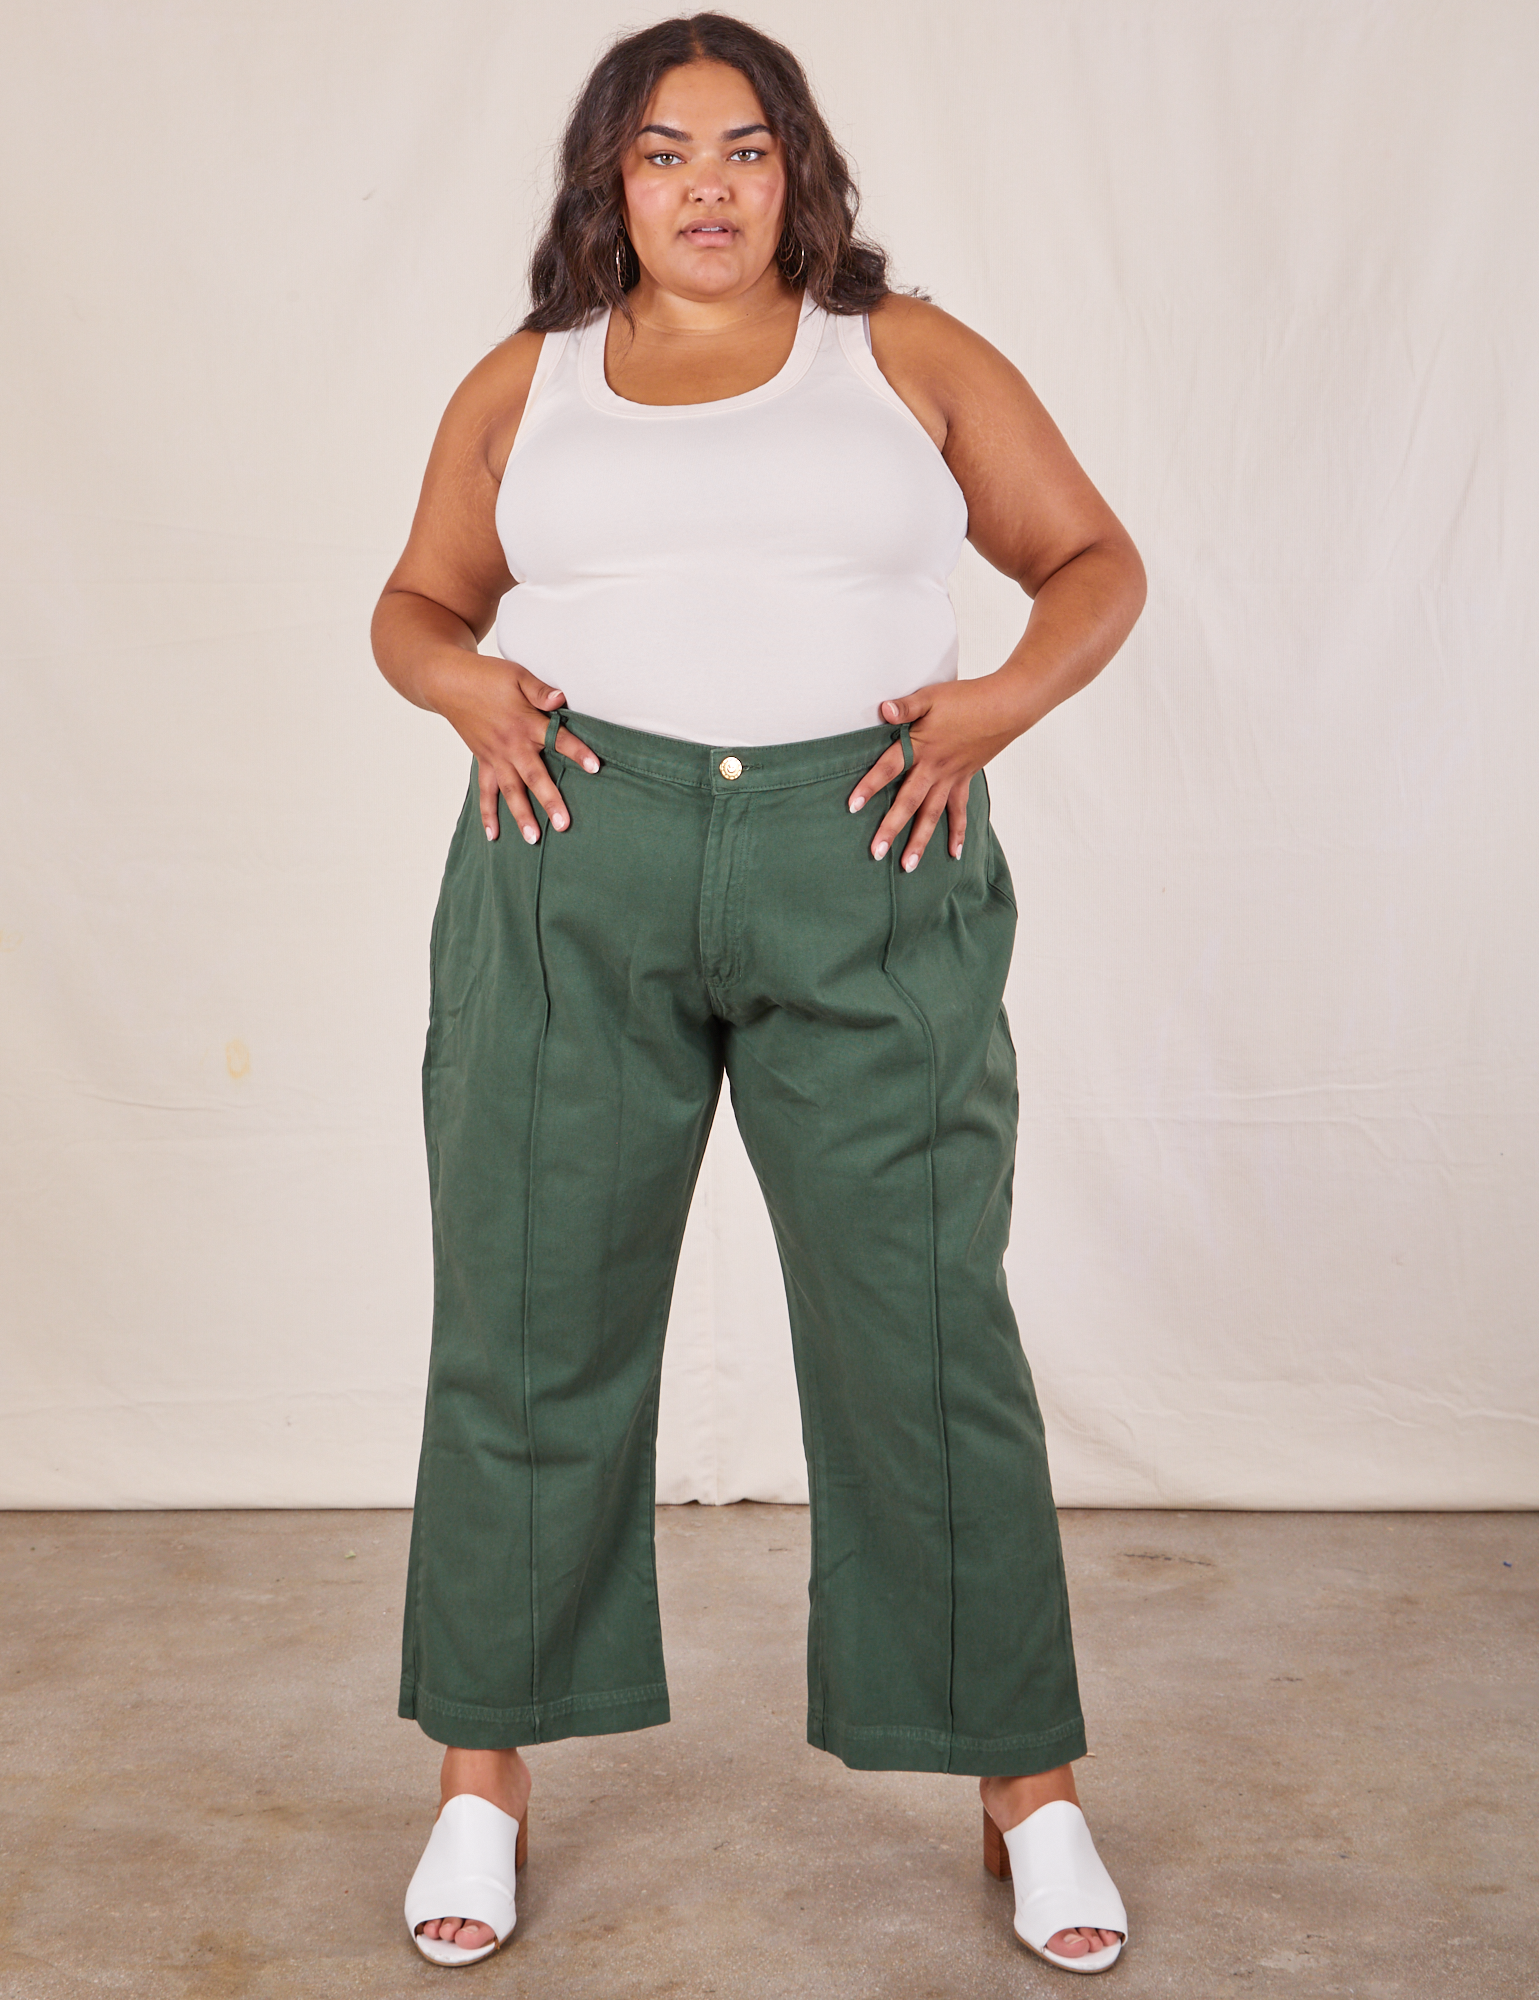 Alicia is 5&#39;9&quot; and wearing 2XL Western Pants in Dark Green Emerald paired with a vintage off-white Tank Top